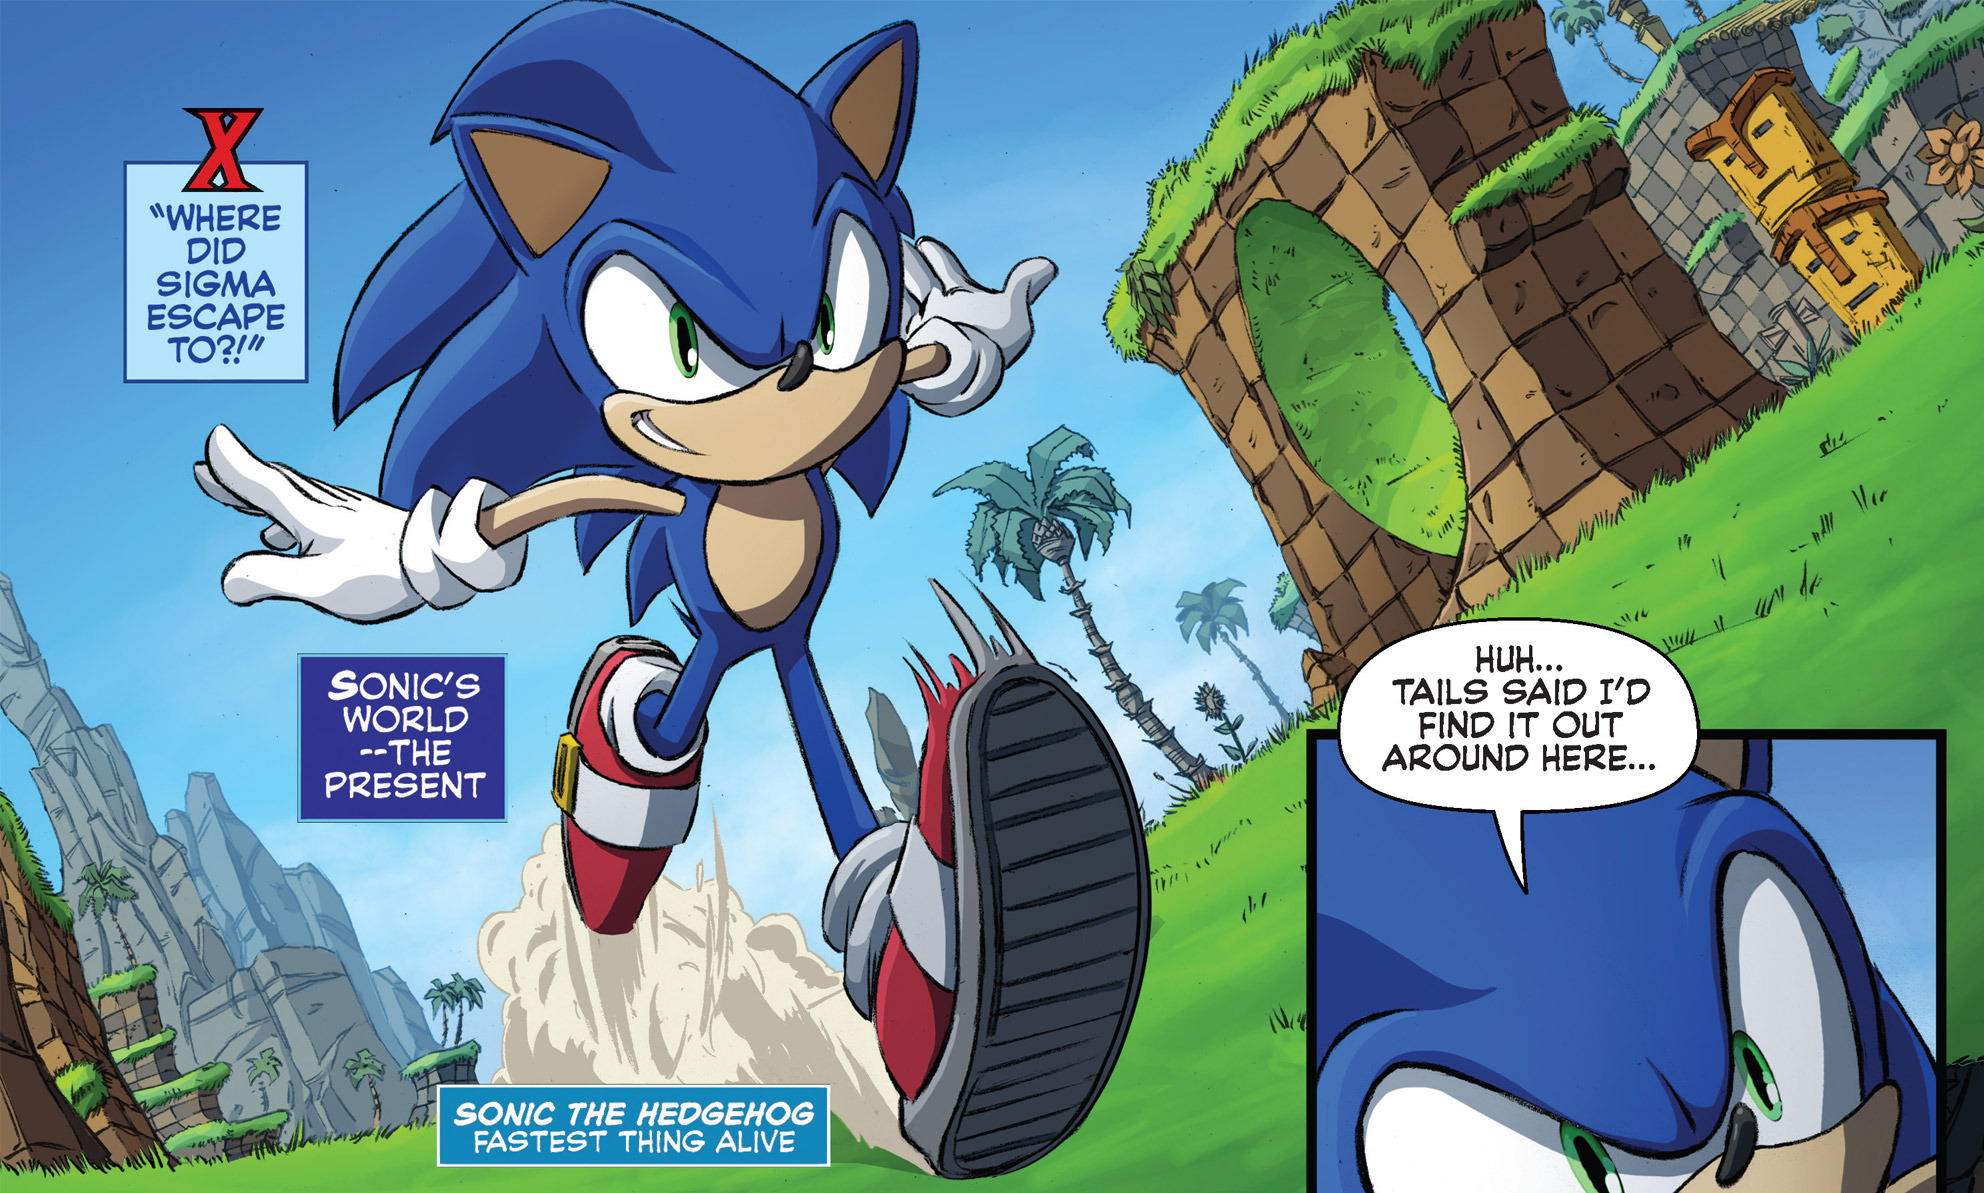 The history of Sonic's iconic Green Hill Zone